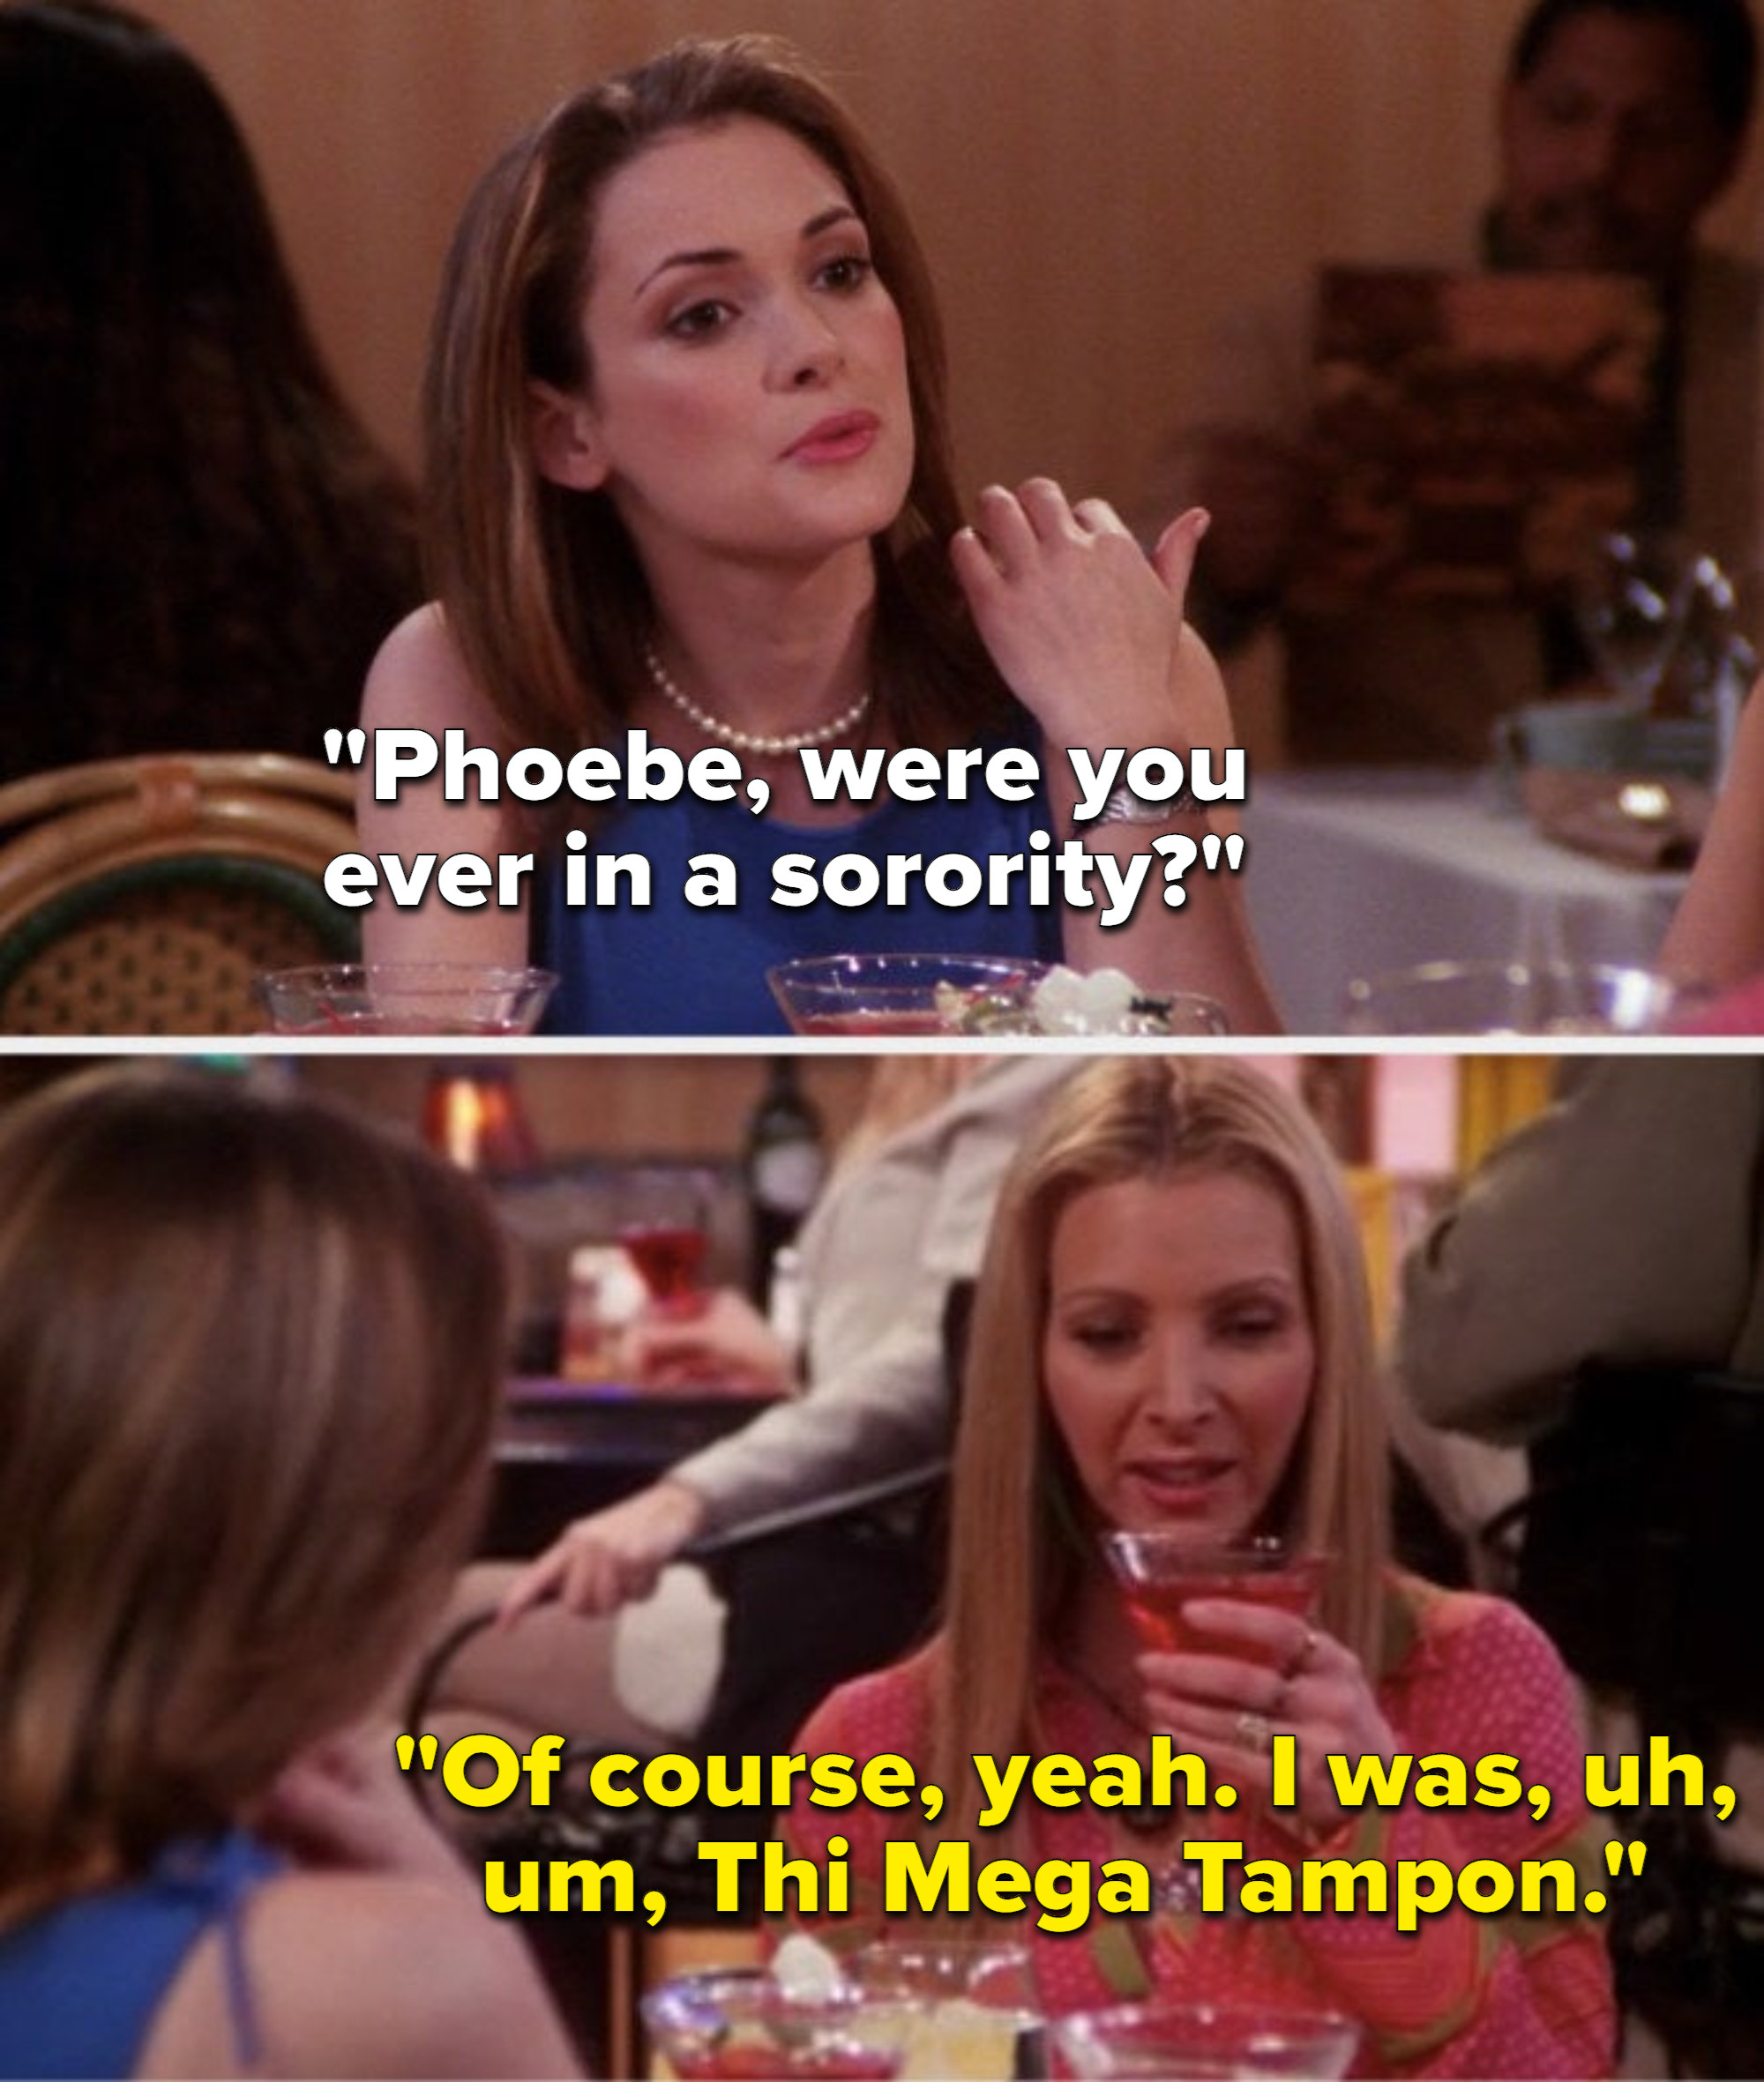 On Friends, Melissa says, Phoebe, were you ever in a sorority, and Phoebe says, Of course, yeah, I was, uh, um, Thi Mega Tampon